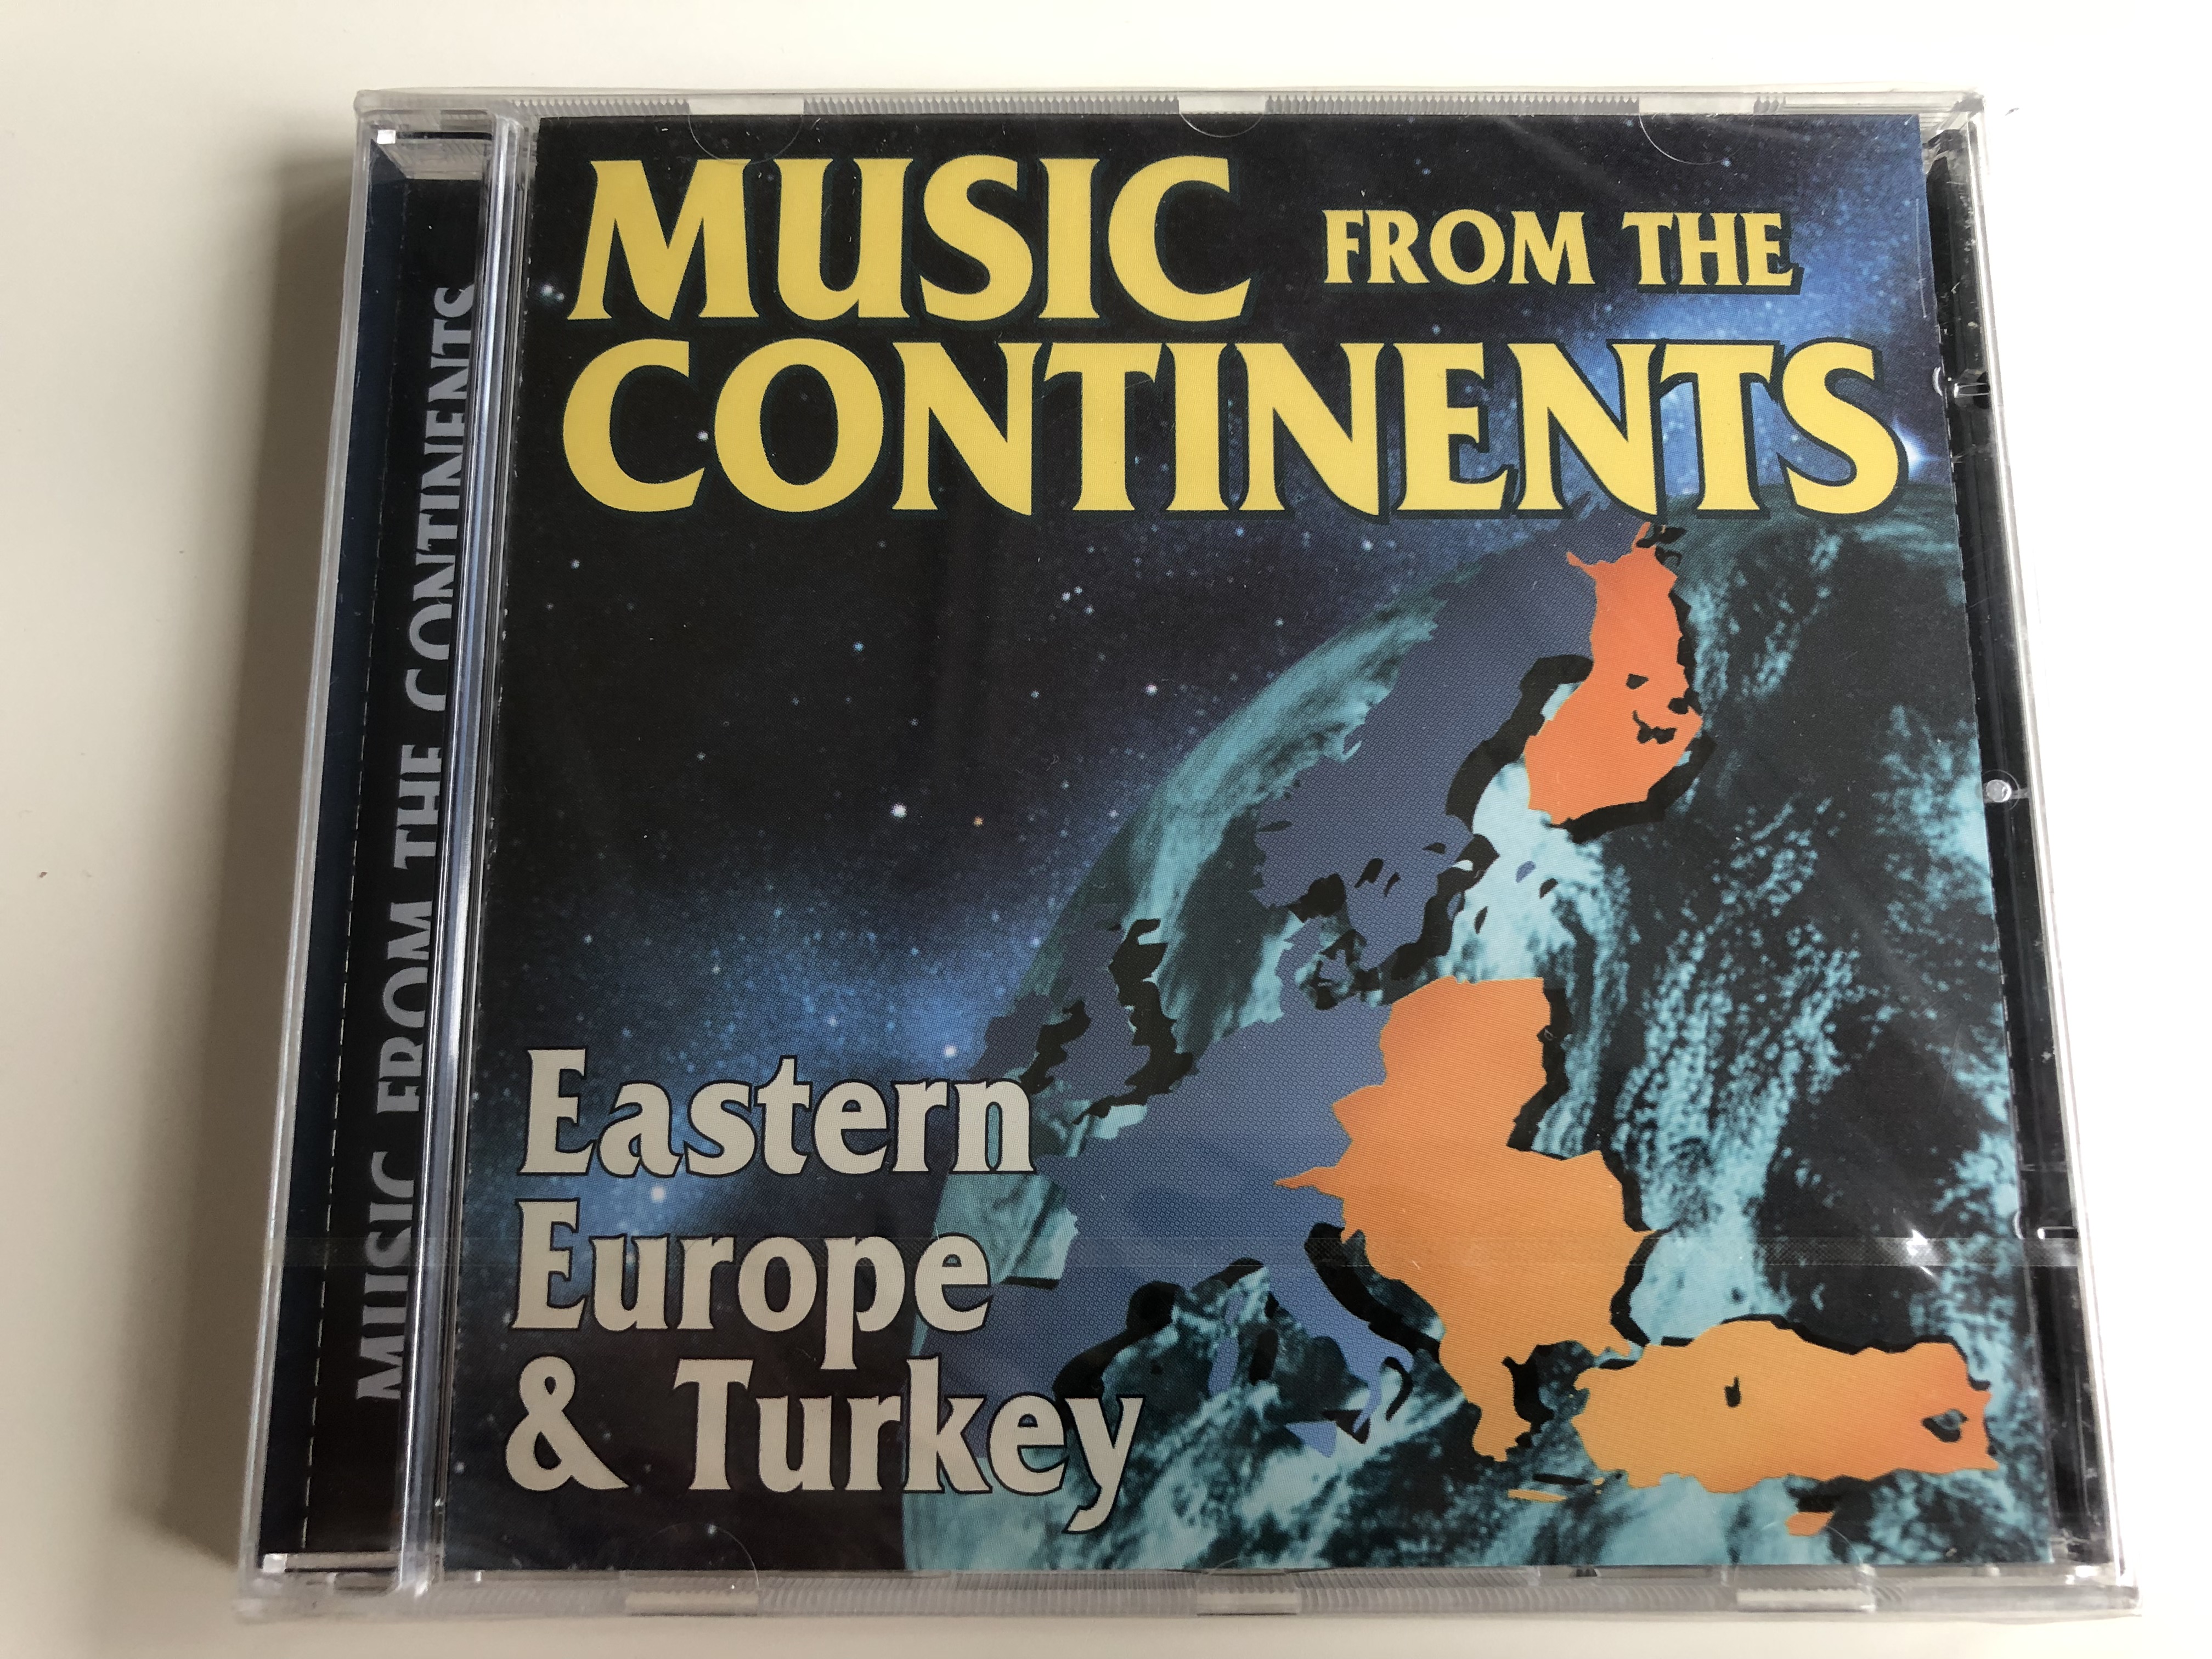 music-from-the-continents-eastern-europe-turkeyimg-1779.jpg